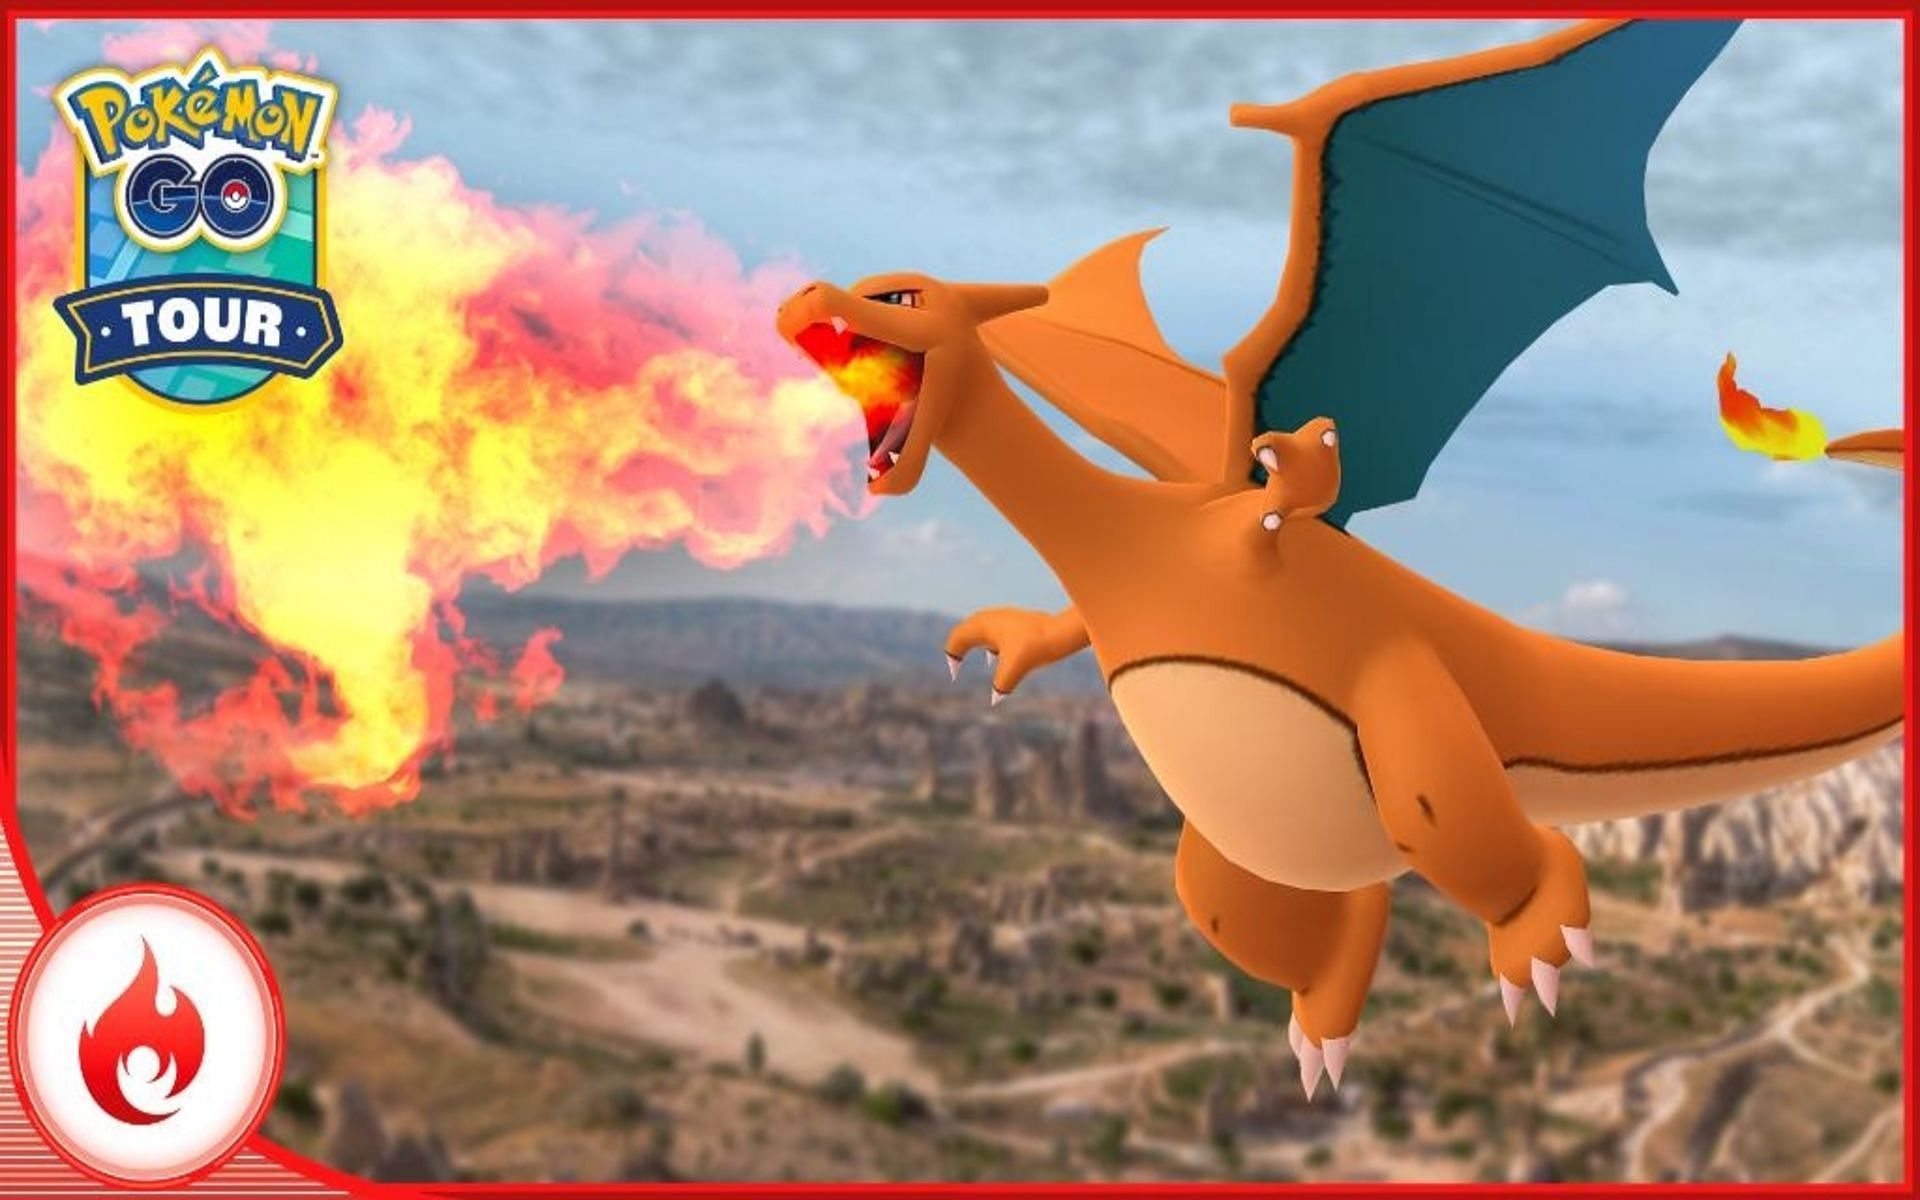 Charizard will be able to learn Blast Burn through this event (Image via Niantic)